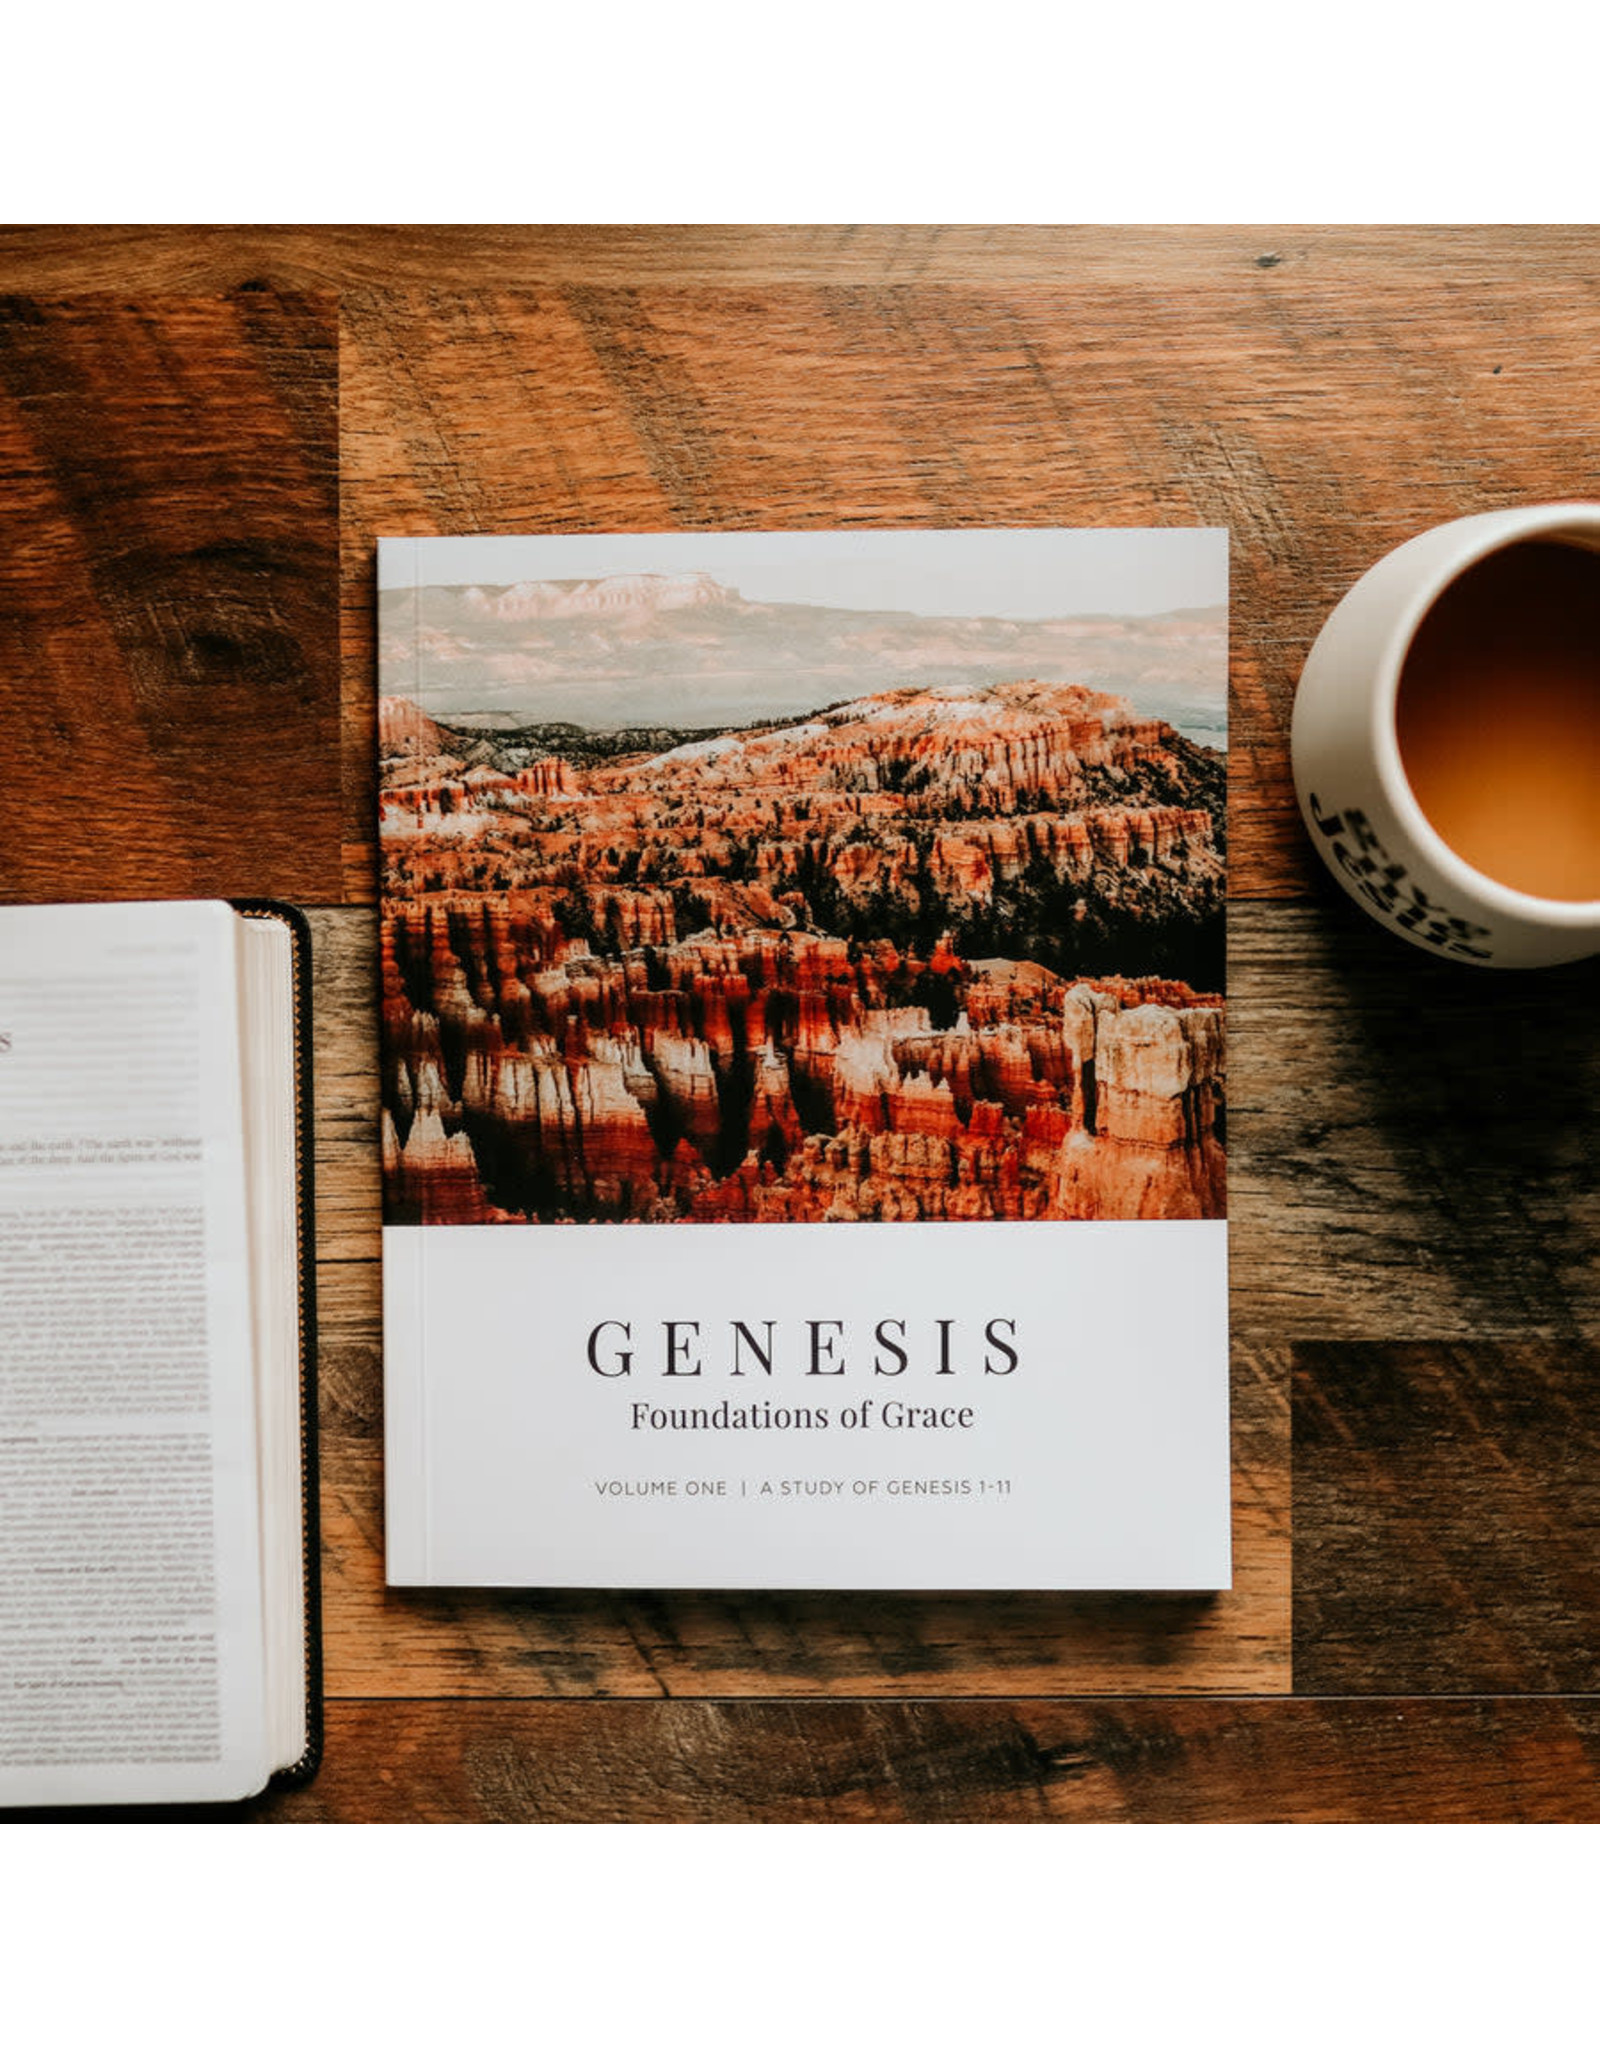 Genesis "Foundations of Grace" Study for Men